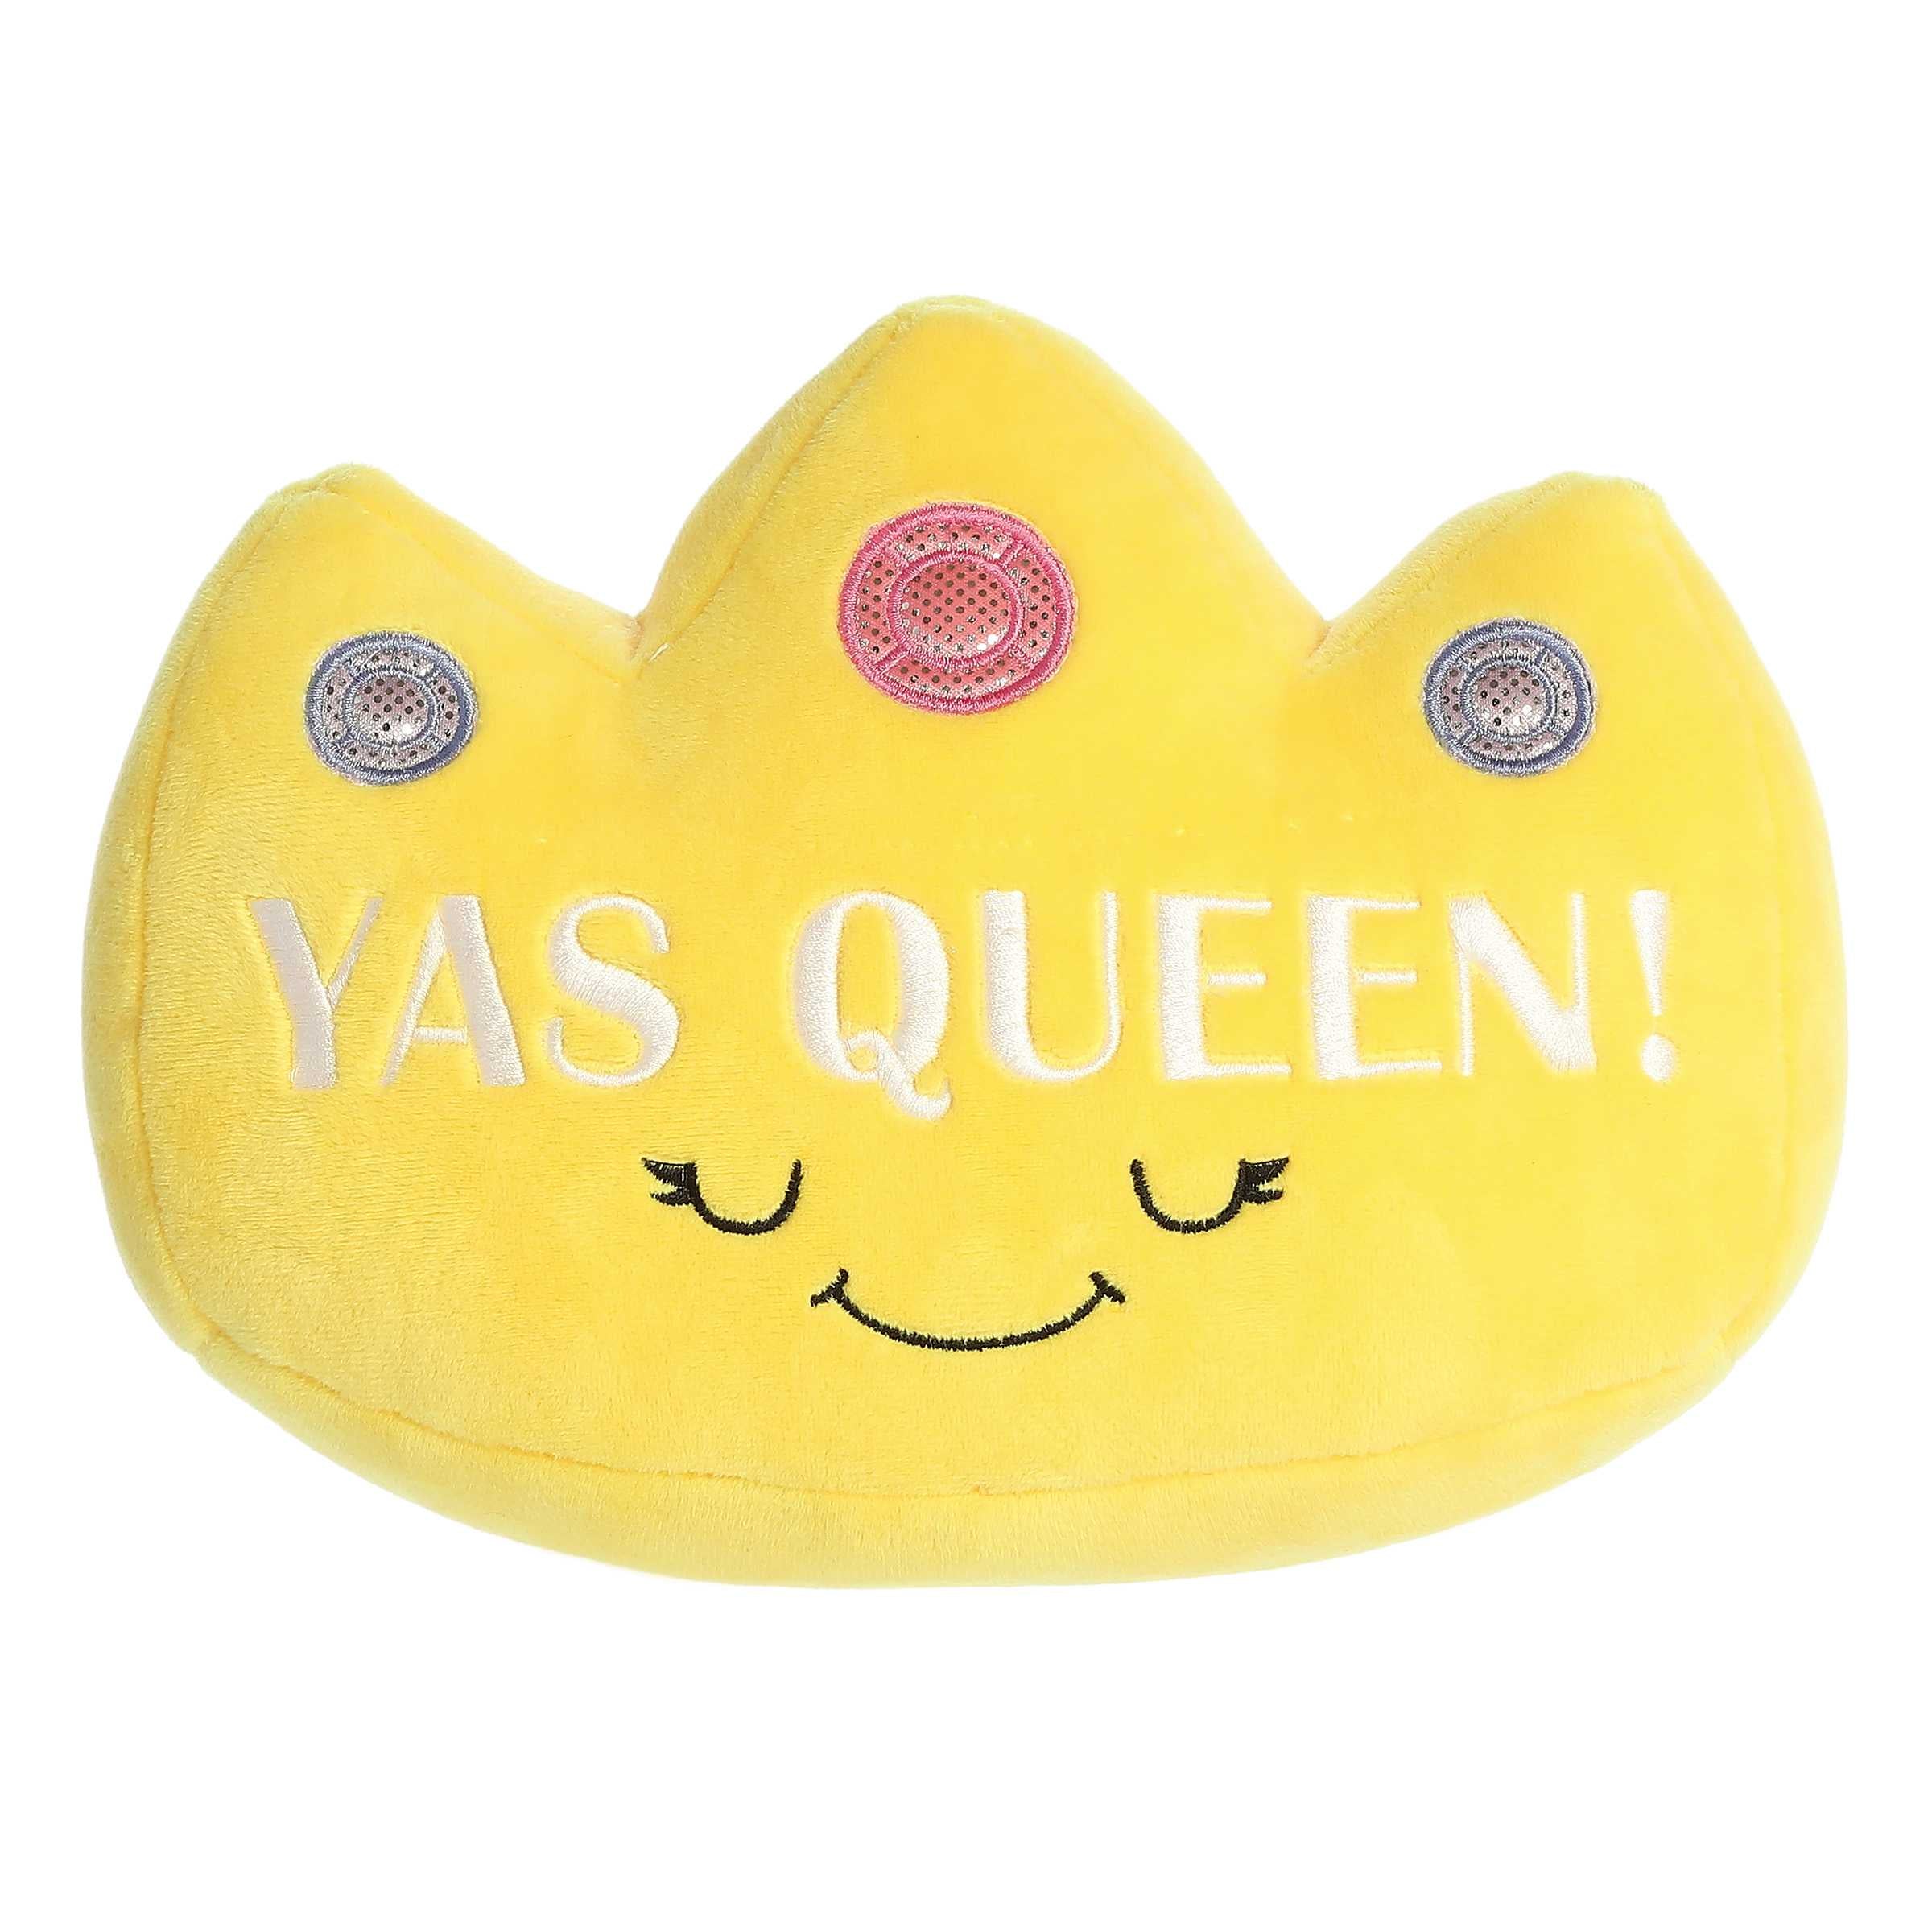 Vibrant yellow plush crown with three embroidered jewels, the phrase 'Yas Queen!', and a happy smiling face from Aurora plush